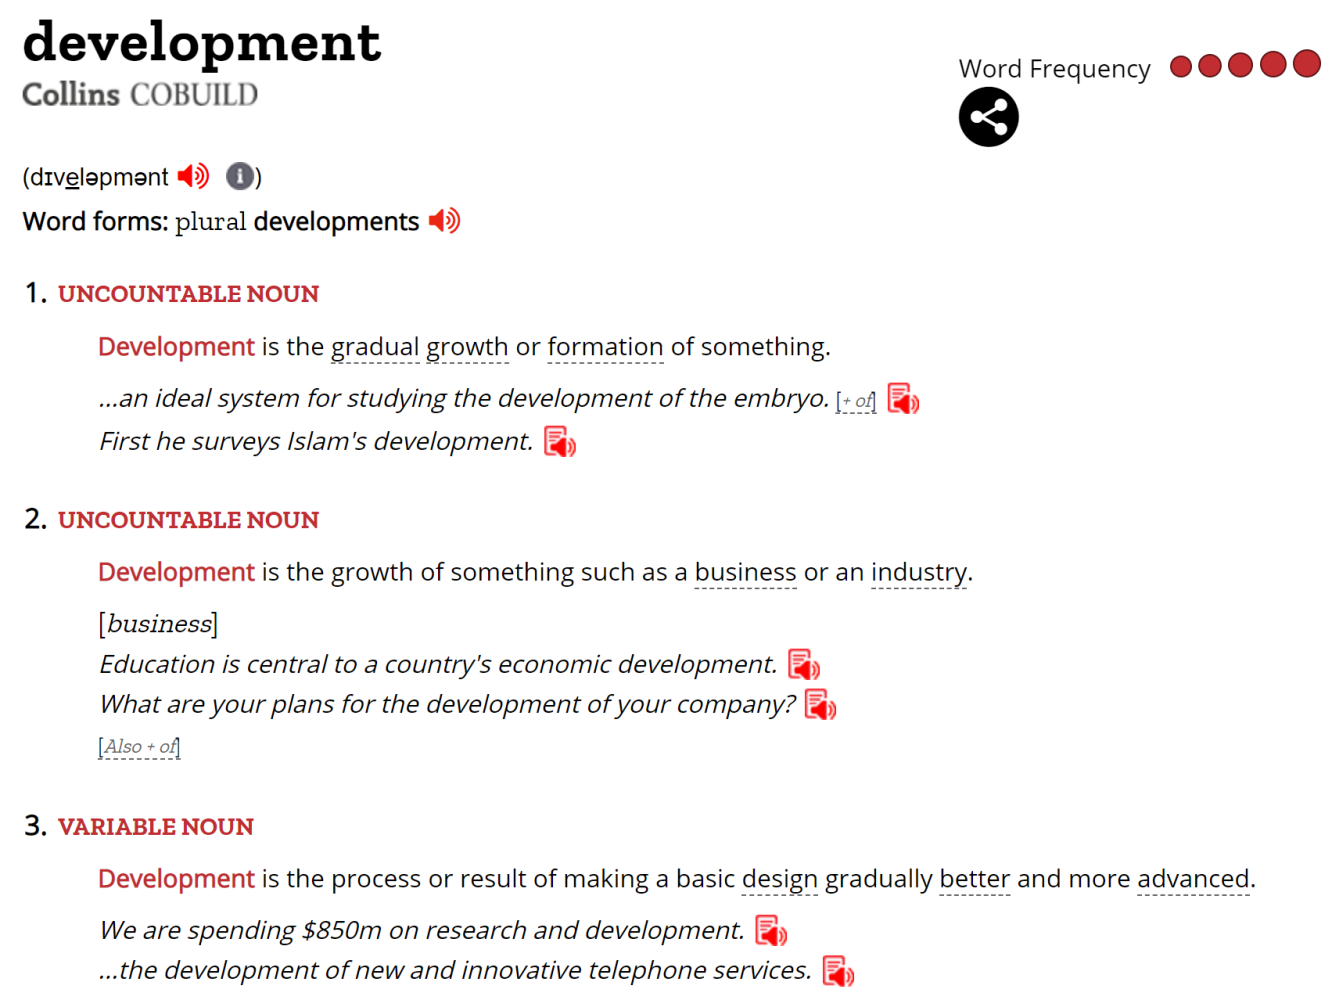 Collins dictionary definition of development